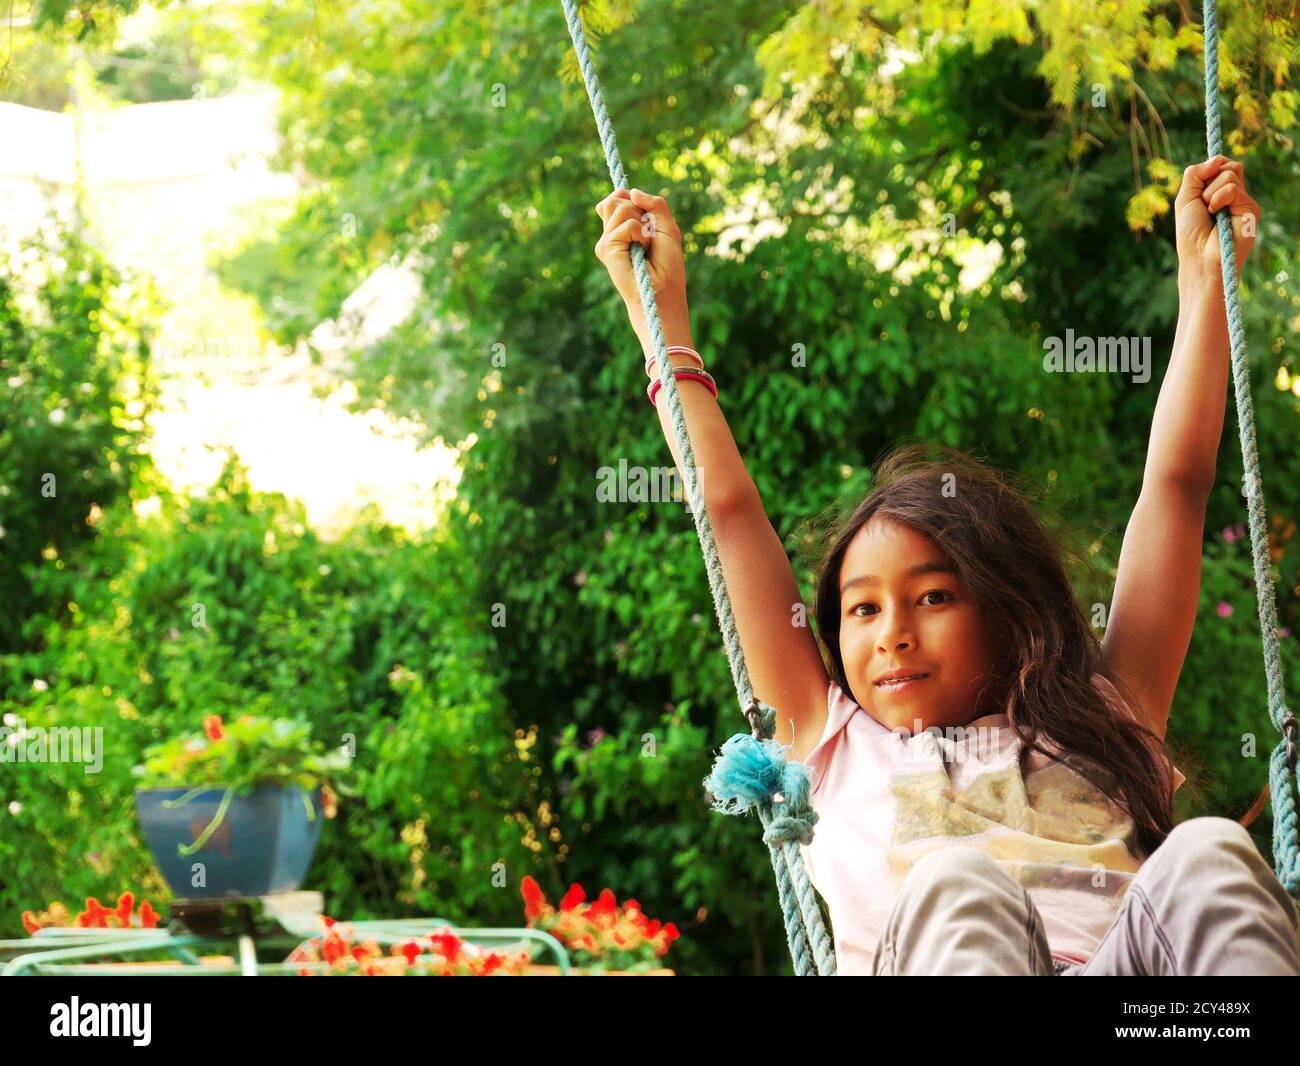 Young smiling mixed-race girl swinging in a park during the vacations Stock Photo